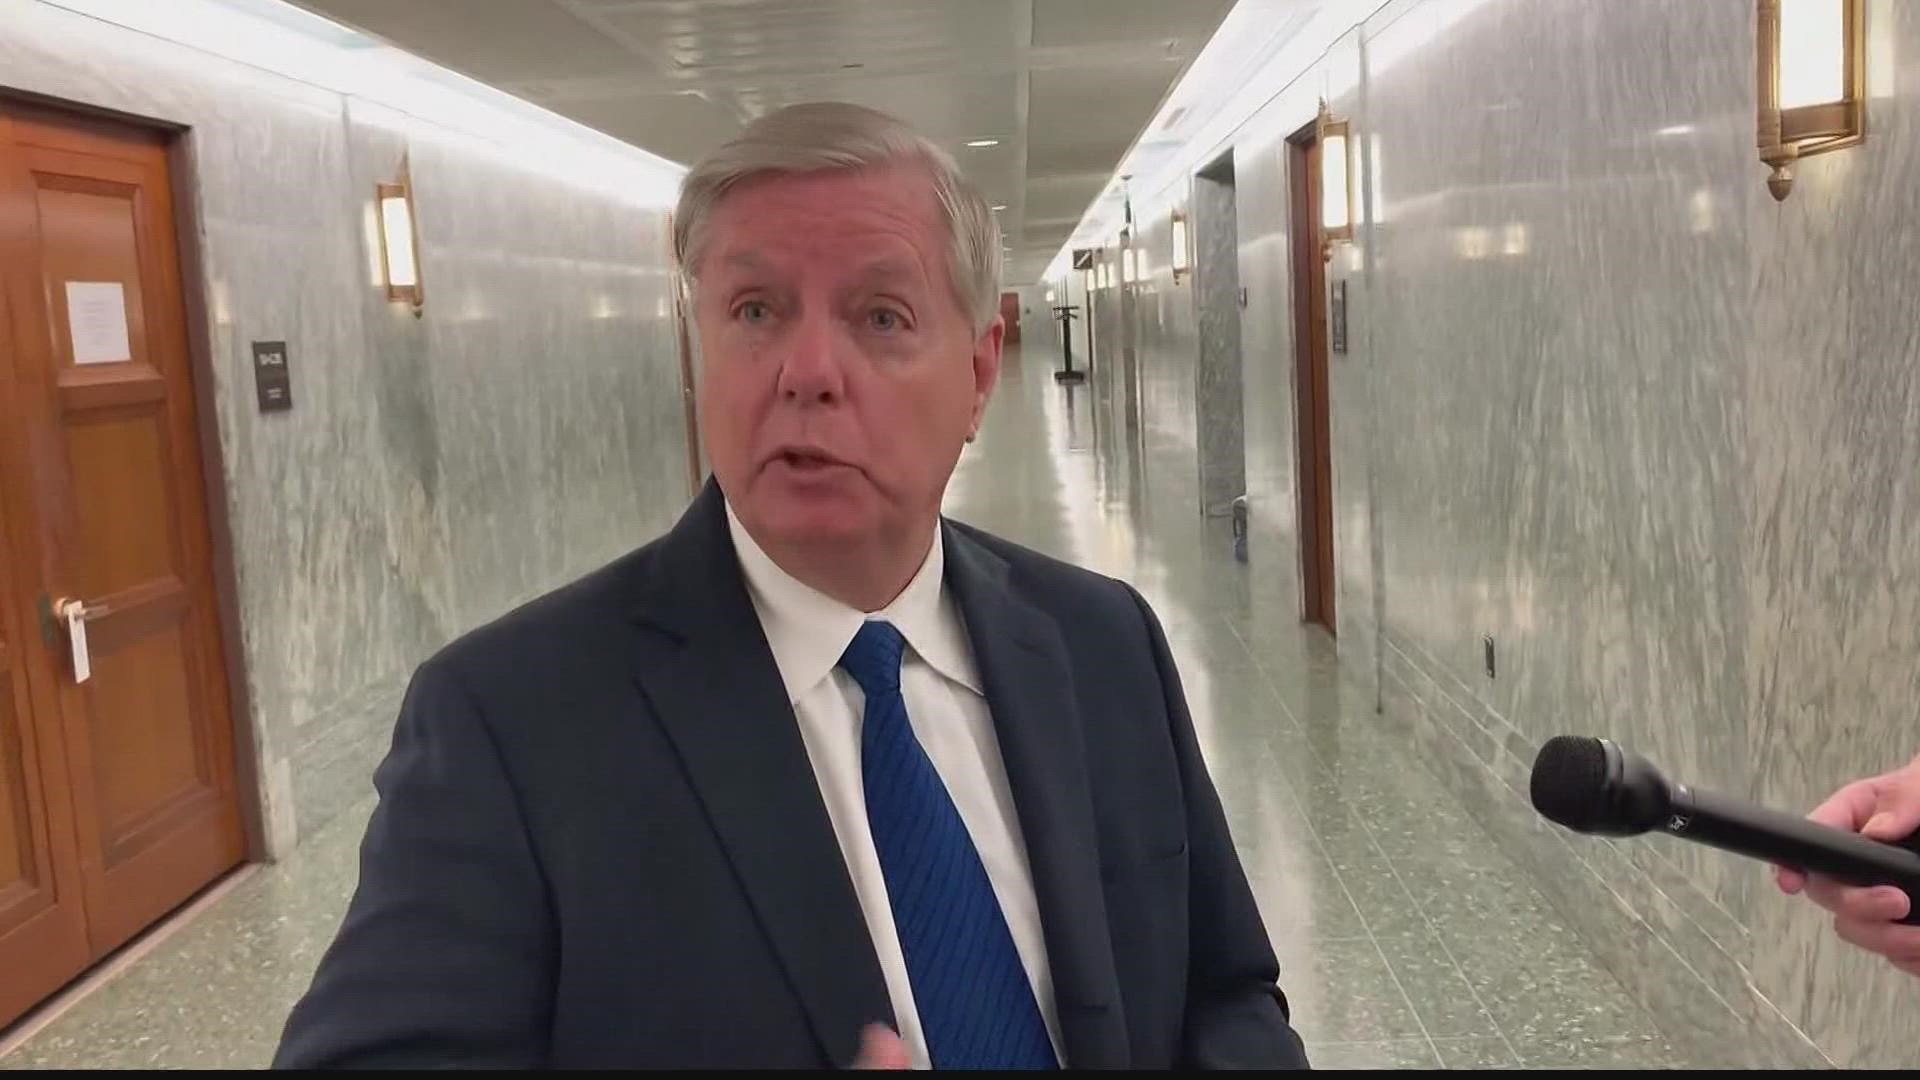 The hearing was held Wednesday, with Judge Leigh Martin May asking Sen. Lindsey Graham's attorneys for a further briefing on the arguments - due by noon on Thursday.